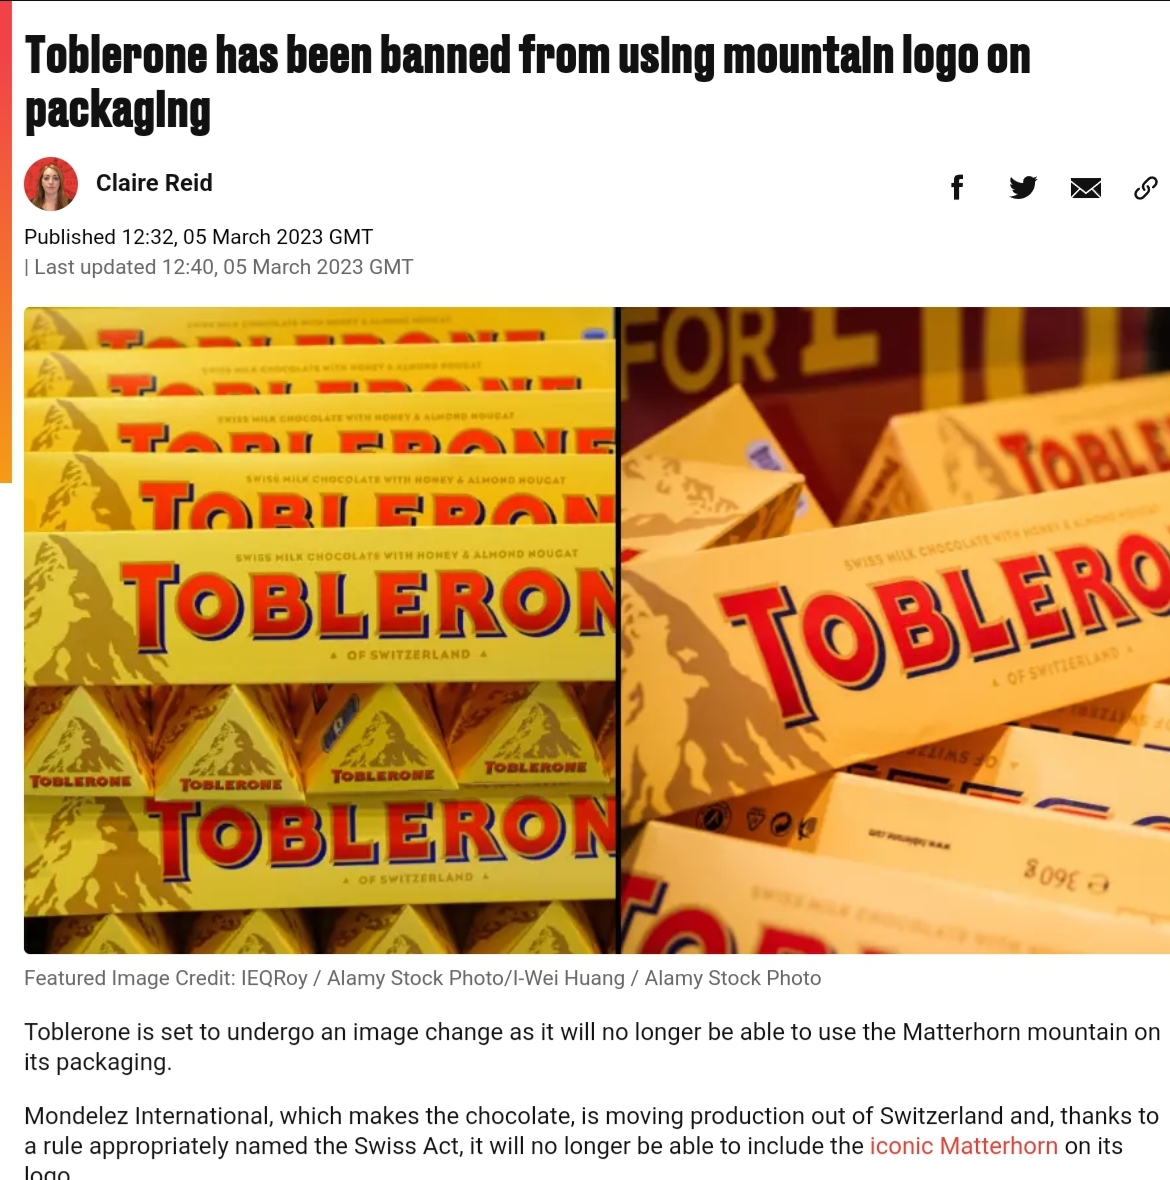 Toblerone has been banned from the consume of mountain logo on packaging